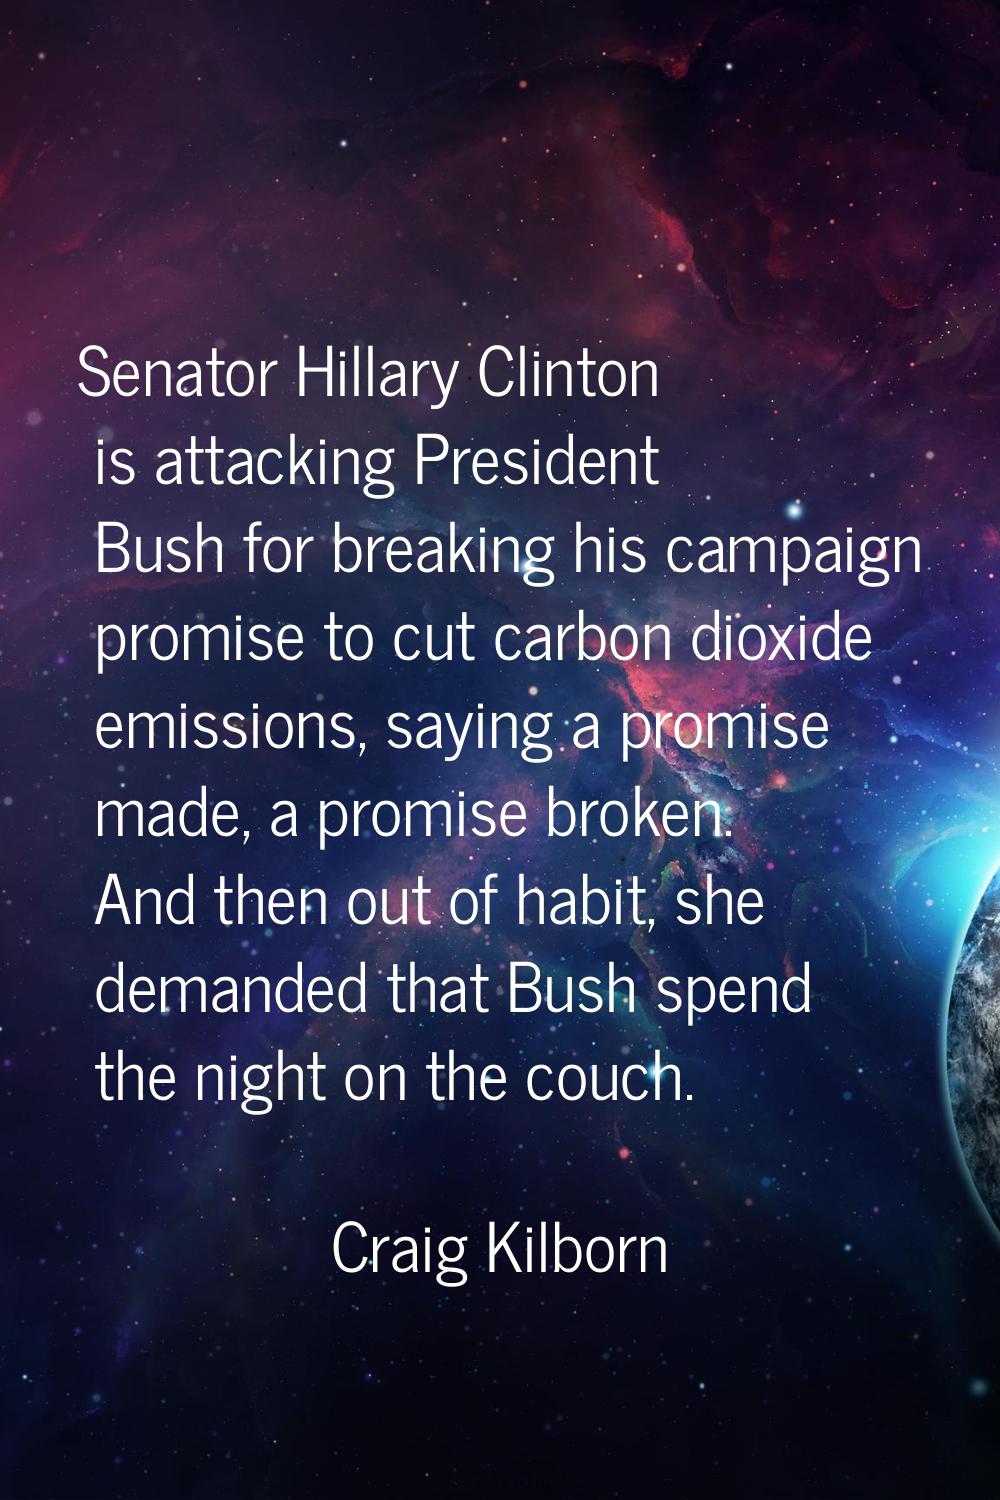 Senator Hillary Clinton is attacking President Bush for breaking his campaign promise to cut carbon